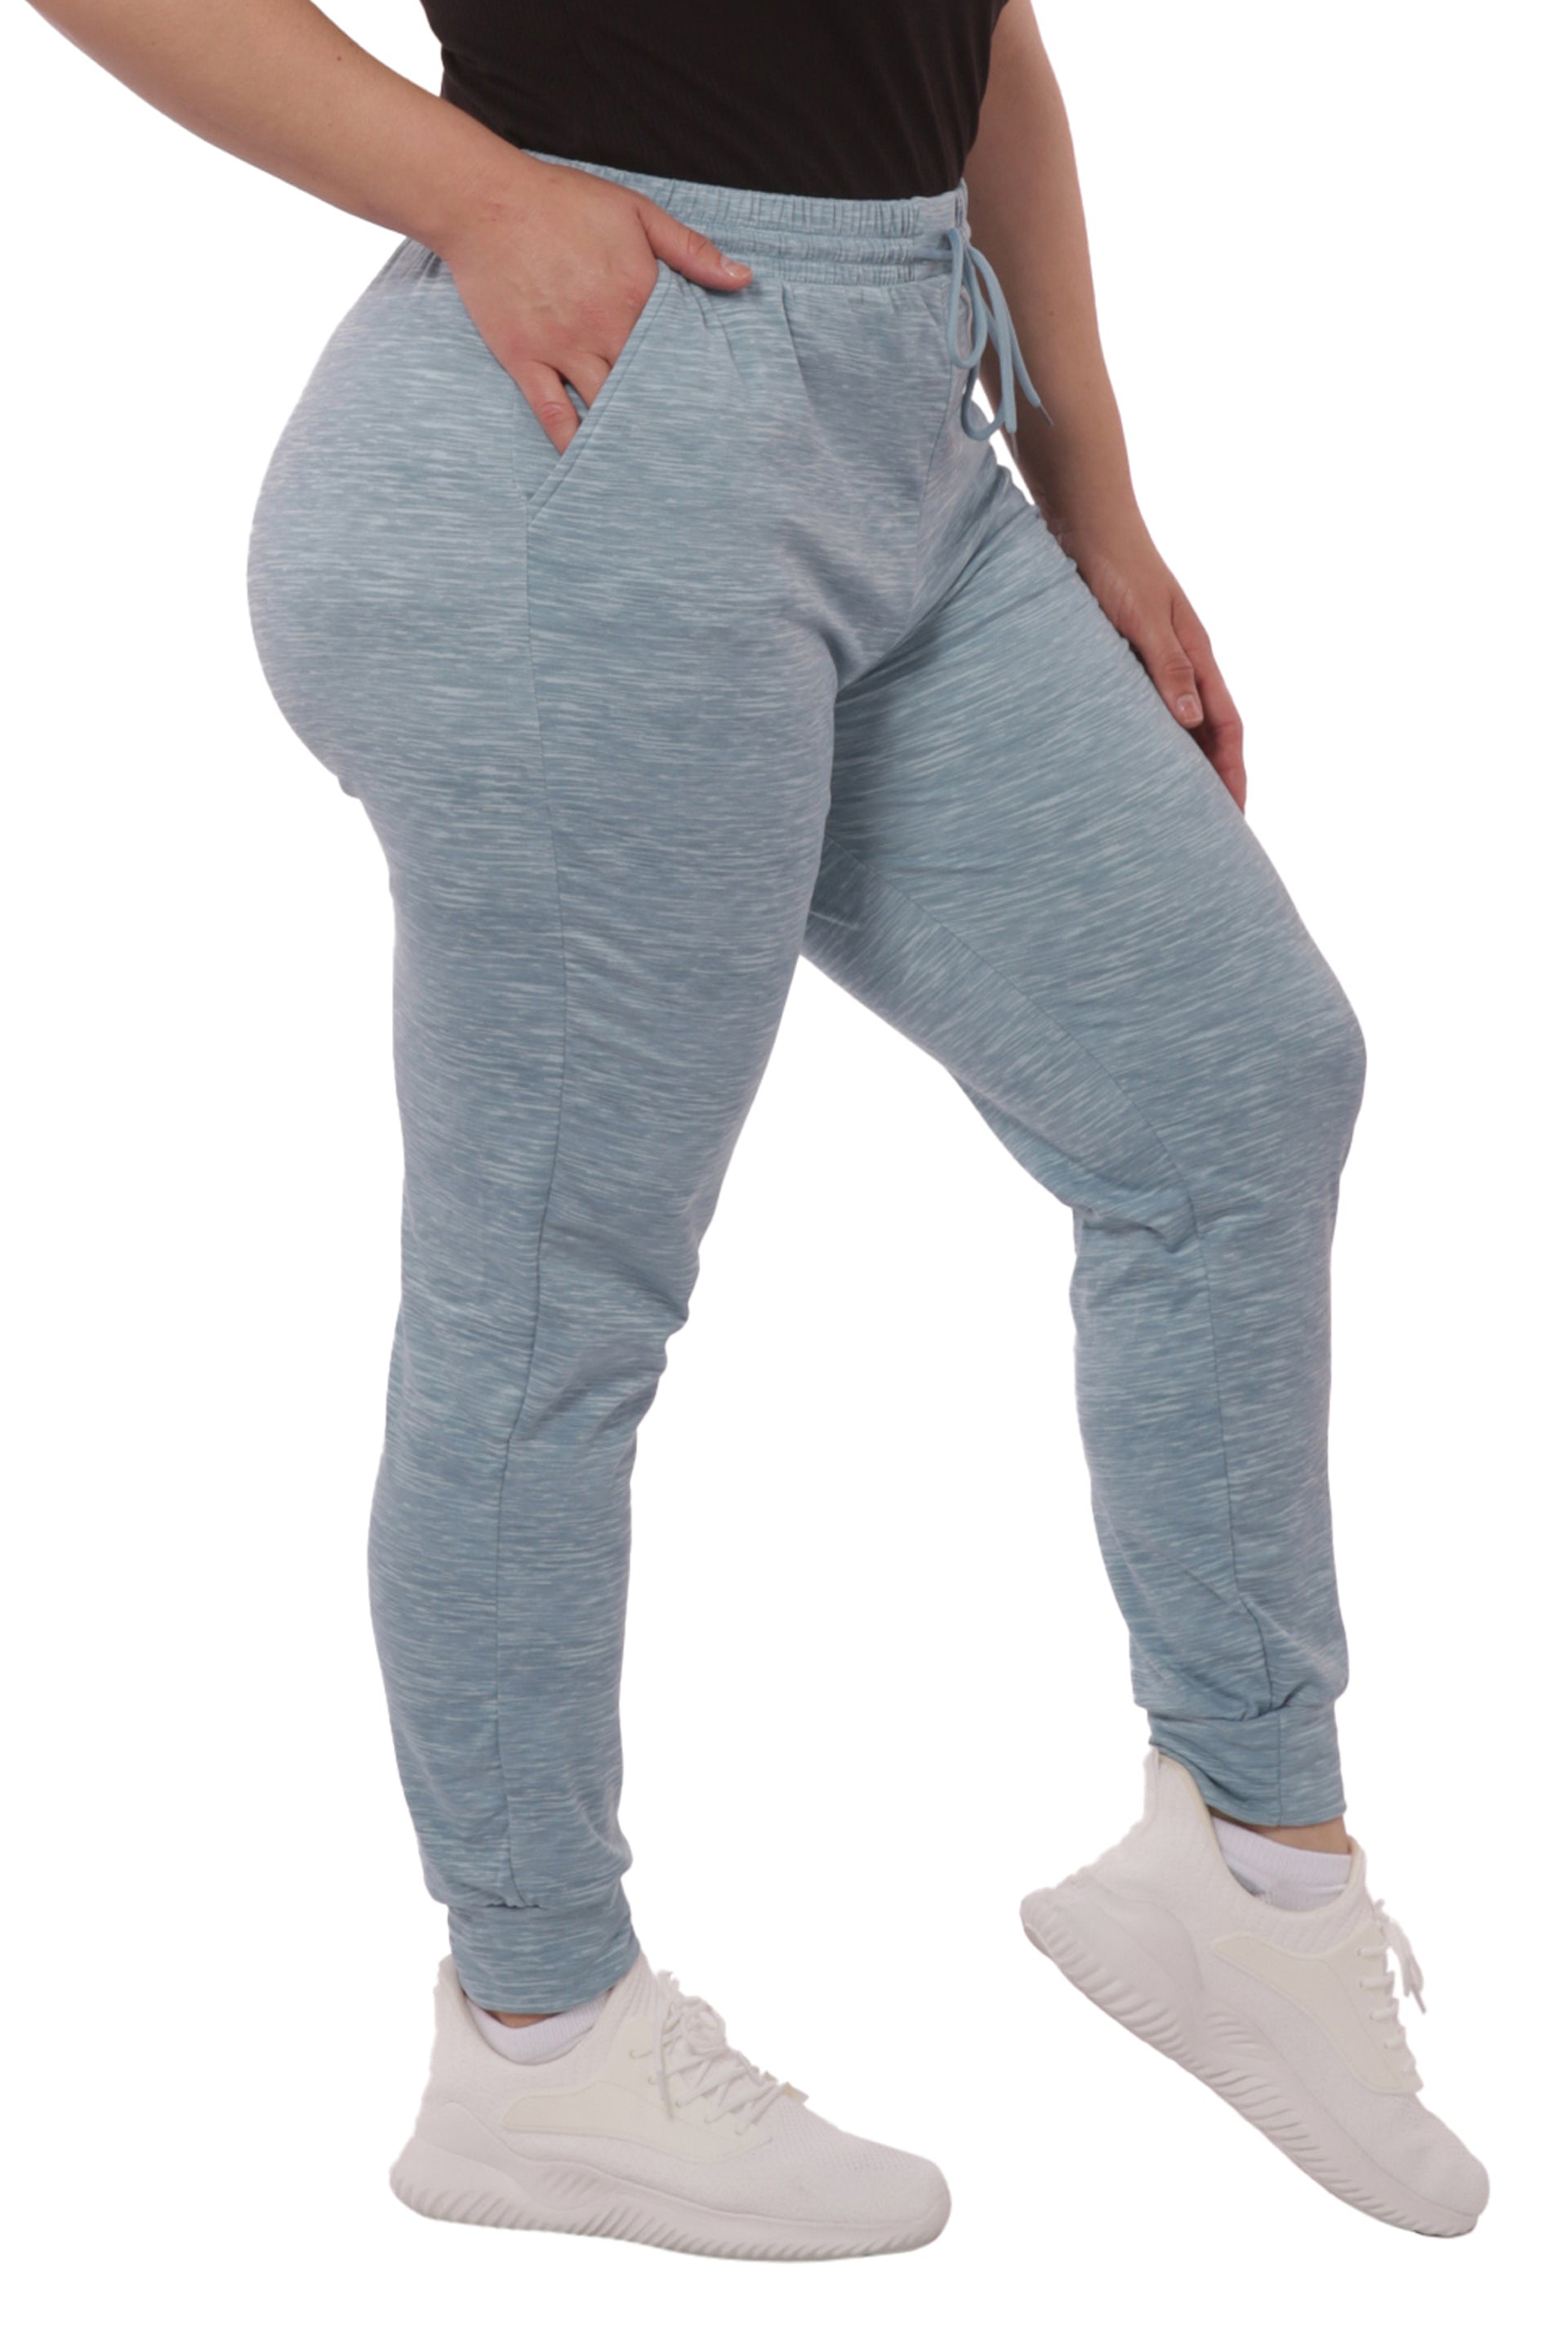 Plus Size Solid Fleece Lined Sports Leggings With Side Pockets